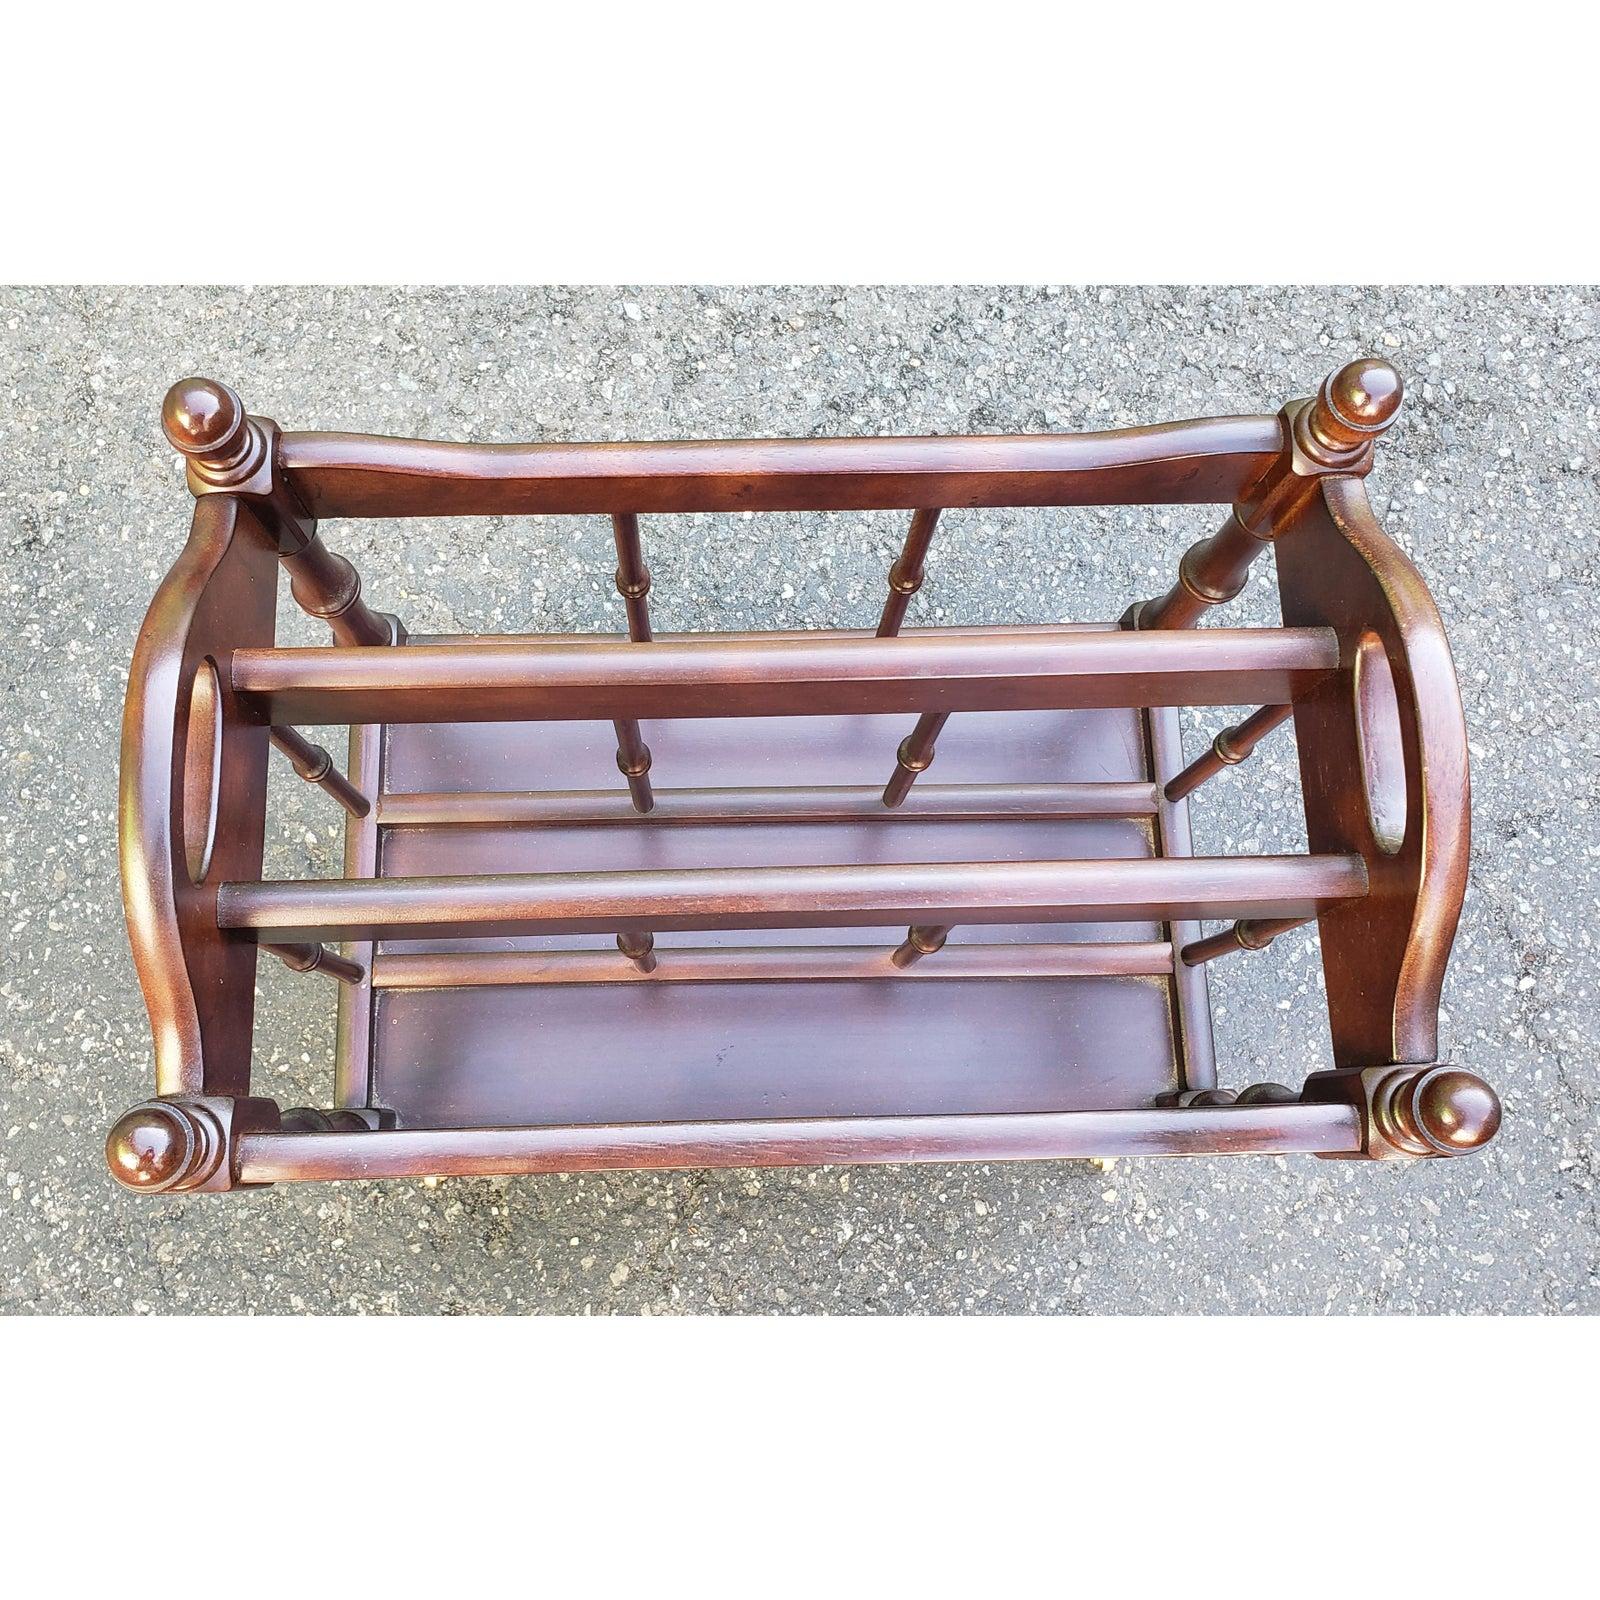 Classic Canterbury style rack for magazines and newspapers, based on the unsurpassed style of English racks designed for originally storing sheets of music. Solid mahogany rack features solid brass casters. 7

Measures 19